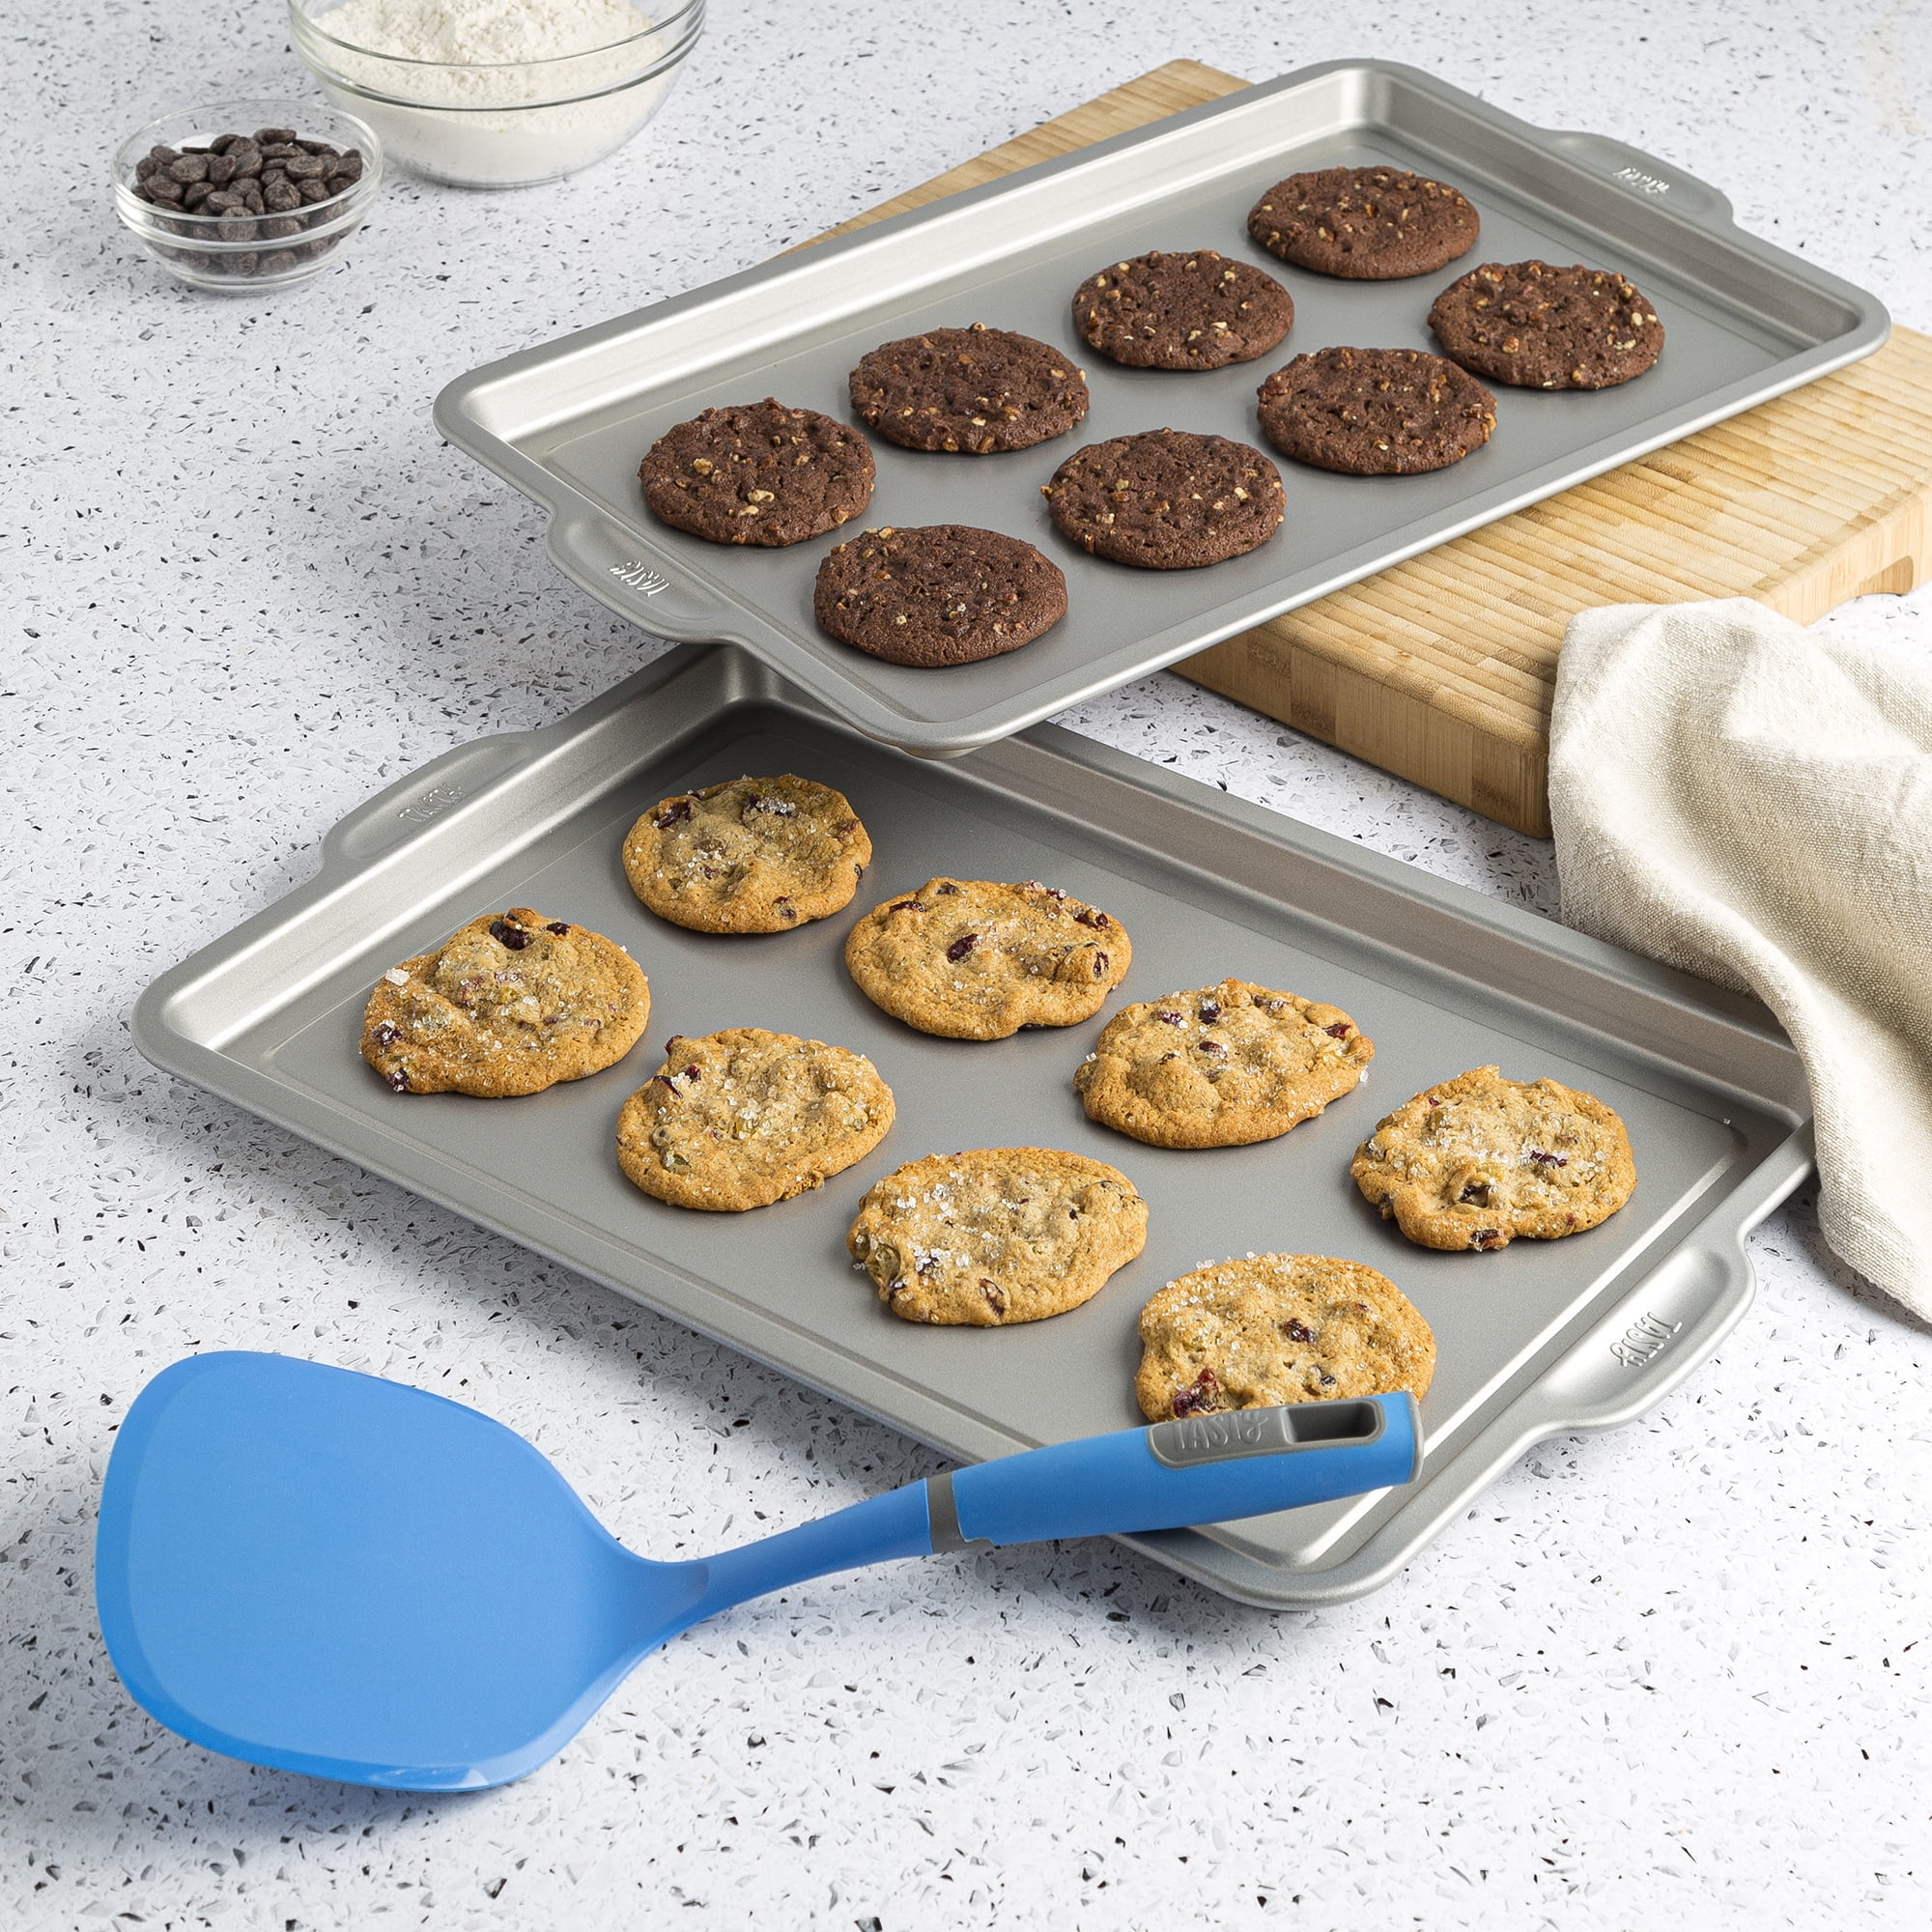 Baking Sheet Cooking Rack Set Extra Large Stainless Steel Cookie Grill Pan 4 Pc 